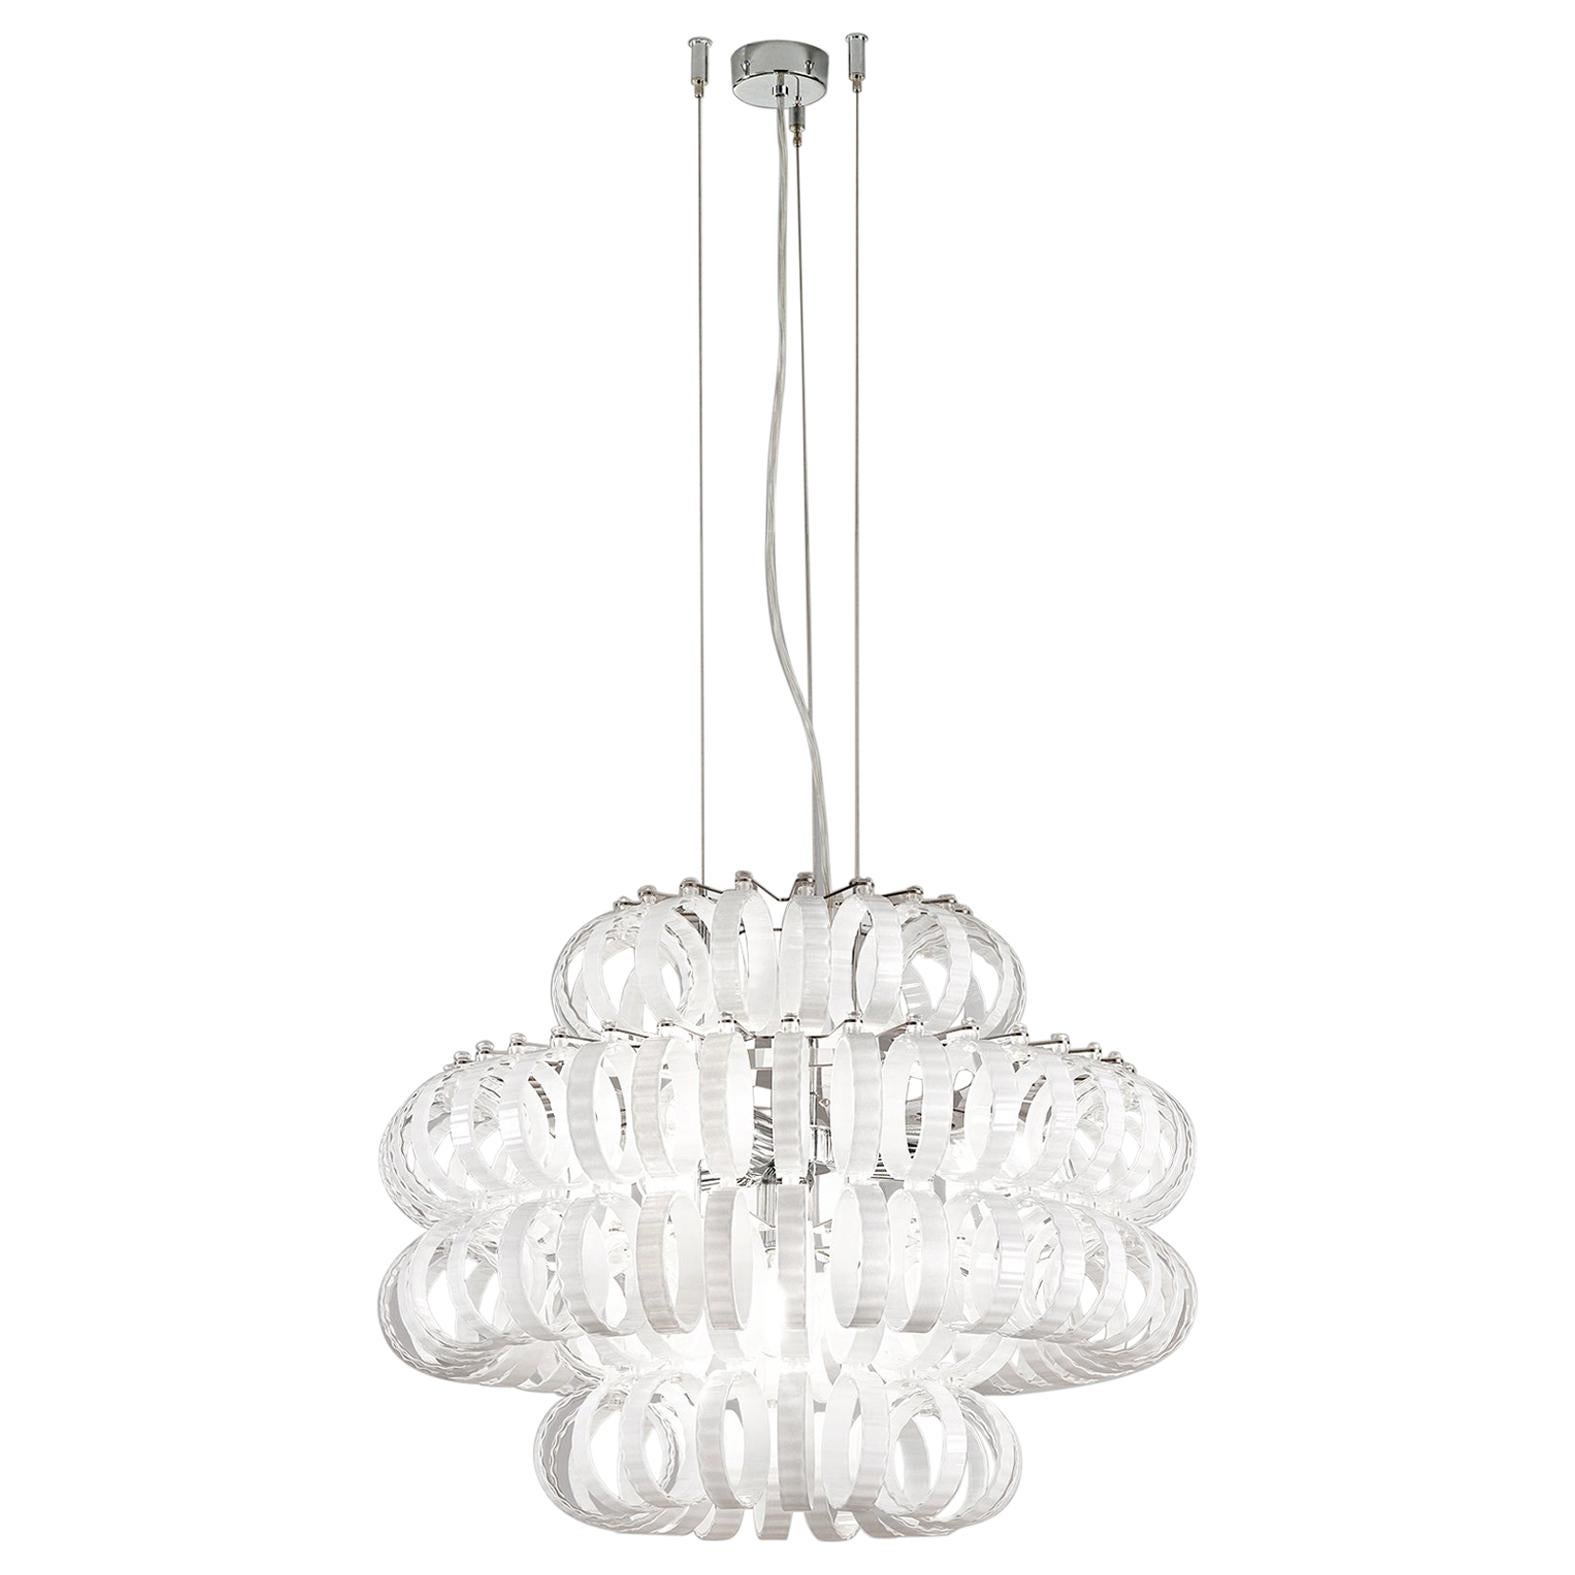 For Sale: White (White and Striped Glass) Small Ecos SP 60C Chandelier with Matte Bronze Frame by Vistosi